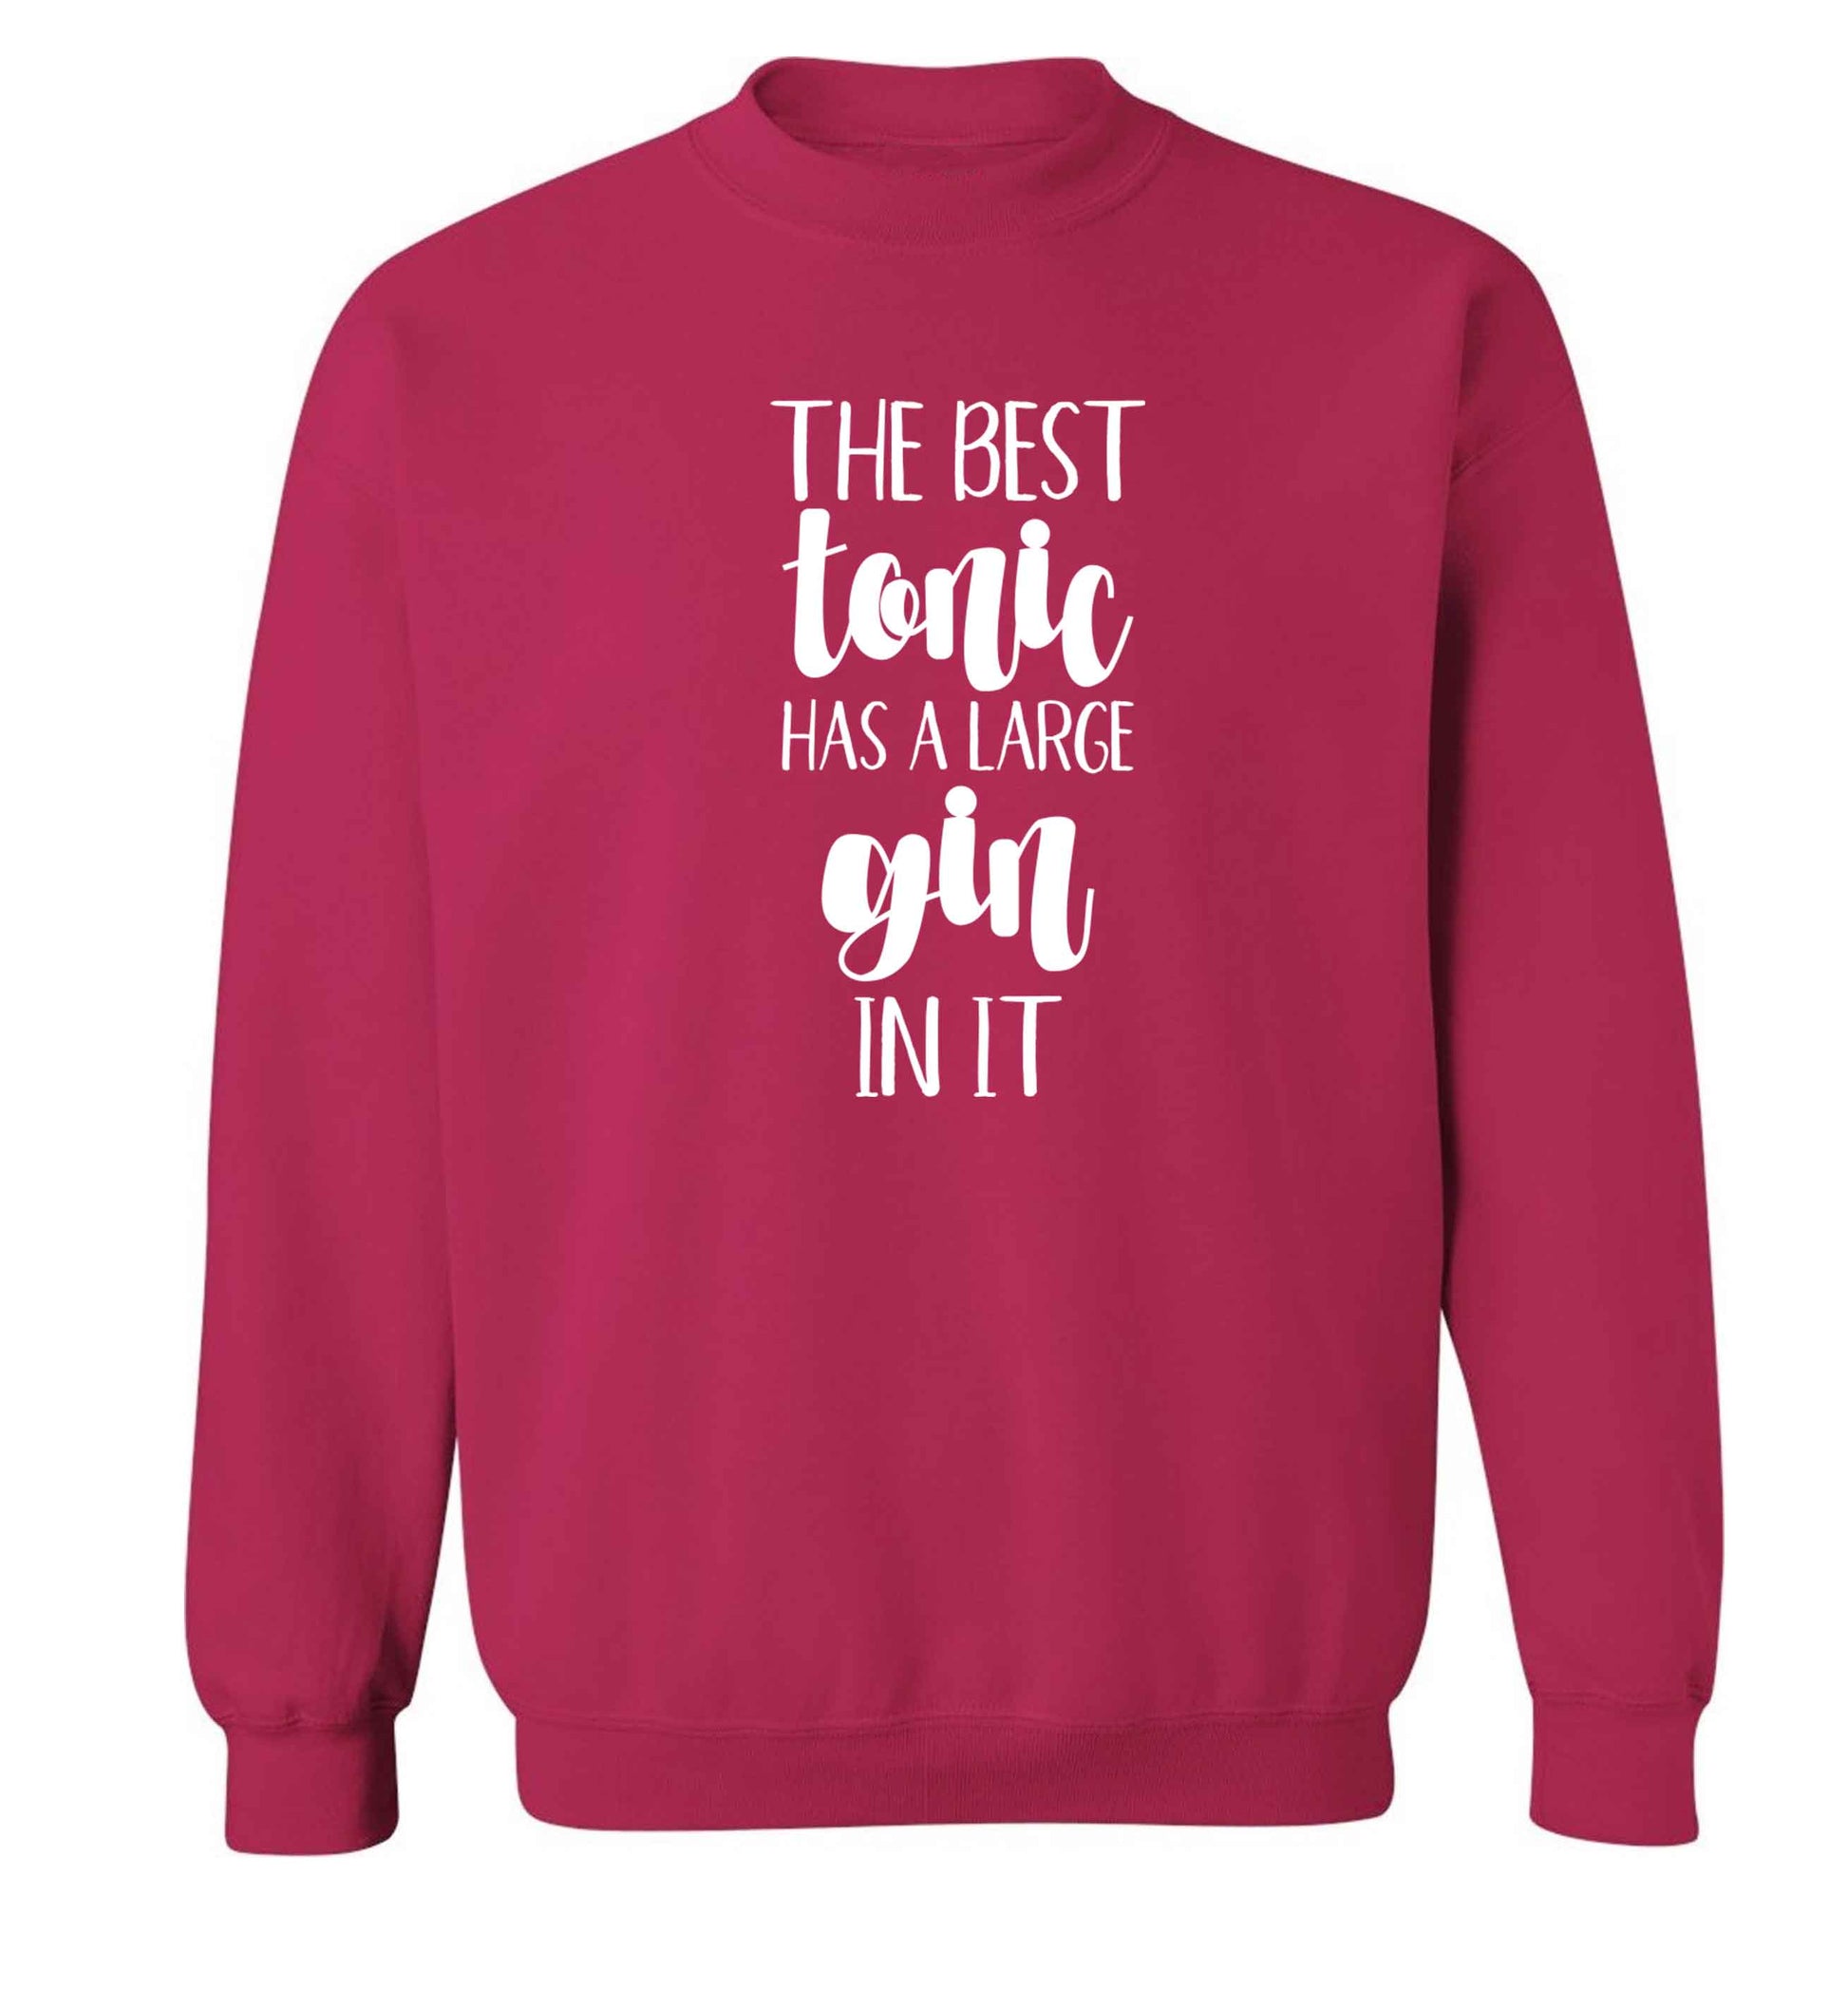 The best tonic has a large gin in it Adult's unisex pink Sweater 2XL